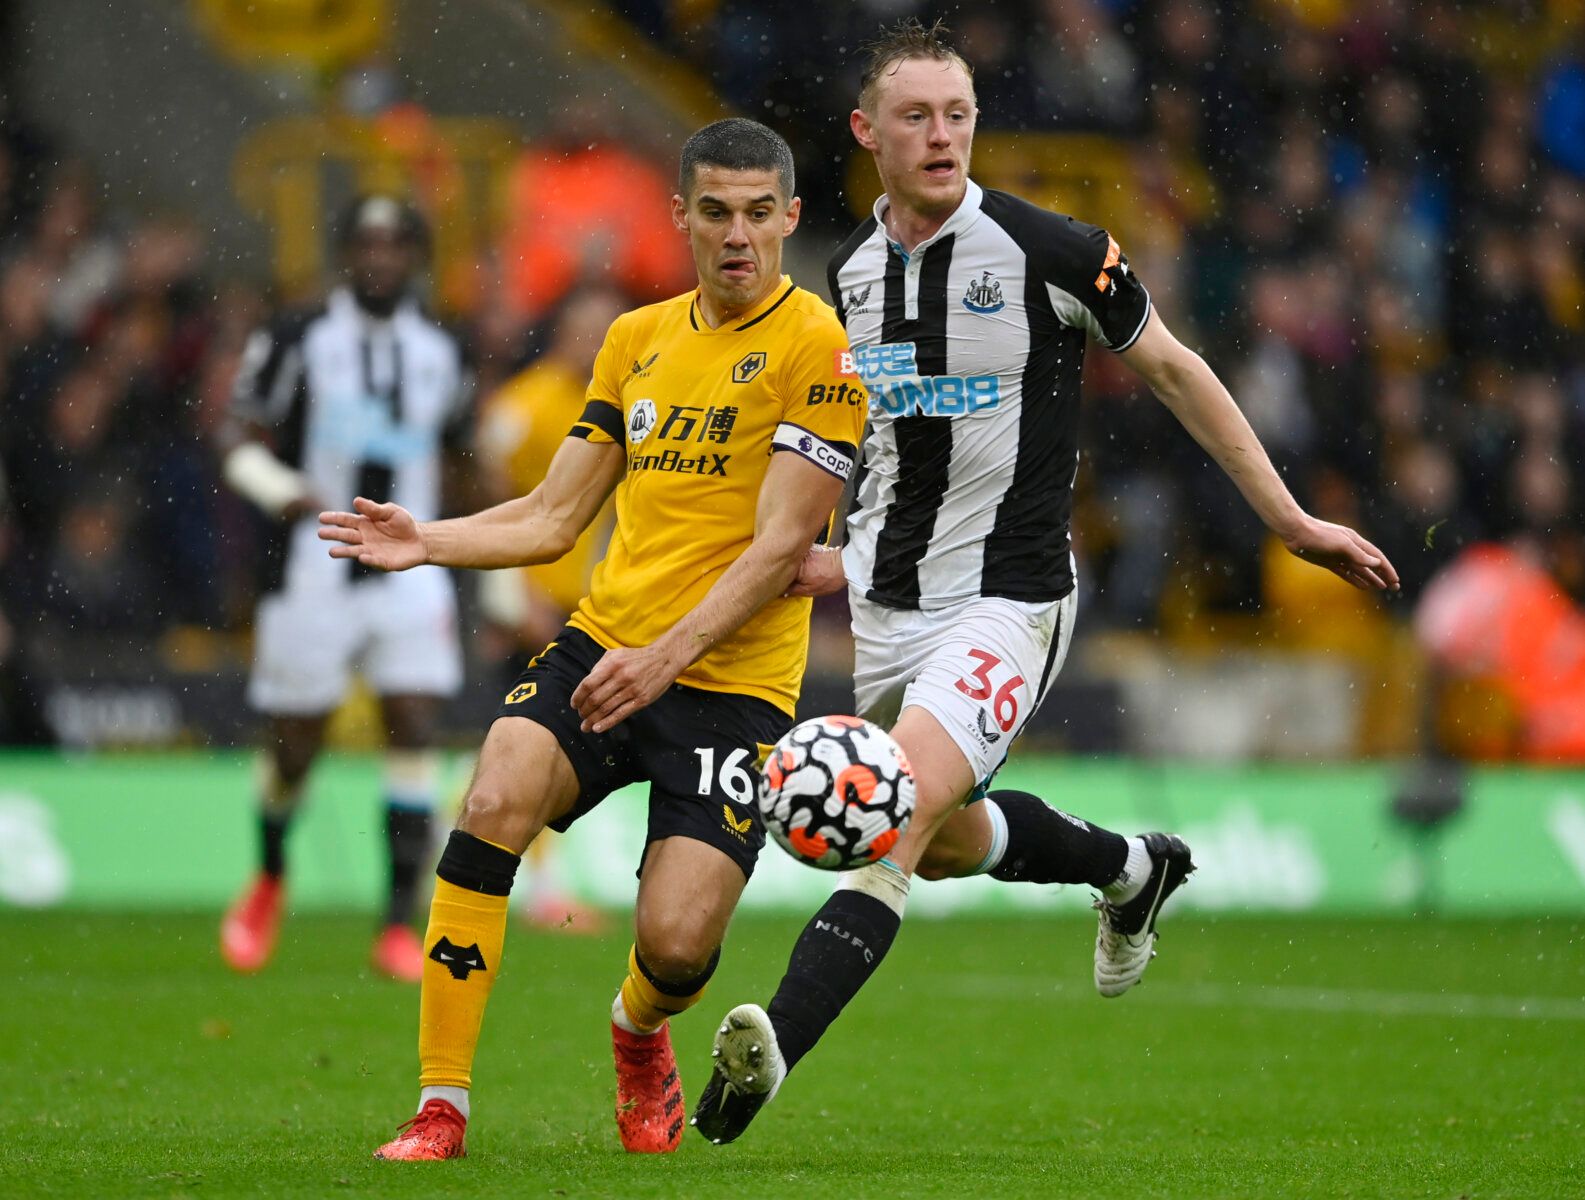 Soccer Football - Premier League - Wolverhampton Wanderers v Newcastle United - Molineux Stadium, Wolverhampton, Britain - October 2, 2021 Wolverhampton Wanderers' Conor Coady in action with Newcastle United's Sean Longstaff REUTERS/Tony Obrien EDITORIAL USE ONLY. No use with unauthorized audio, video, data, fixture lists, club/league logos or 'live' services. Online in-match use limited to 75 images, no video emulation. No use in betting, games or single club /league/player publications.  Pleas